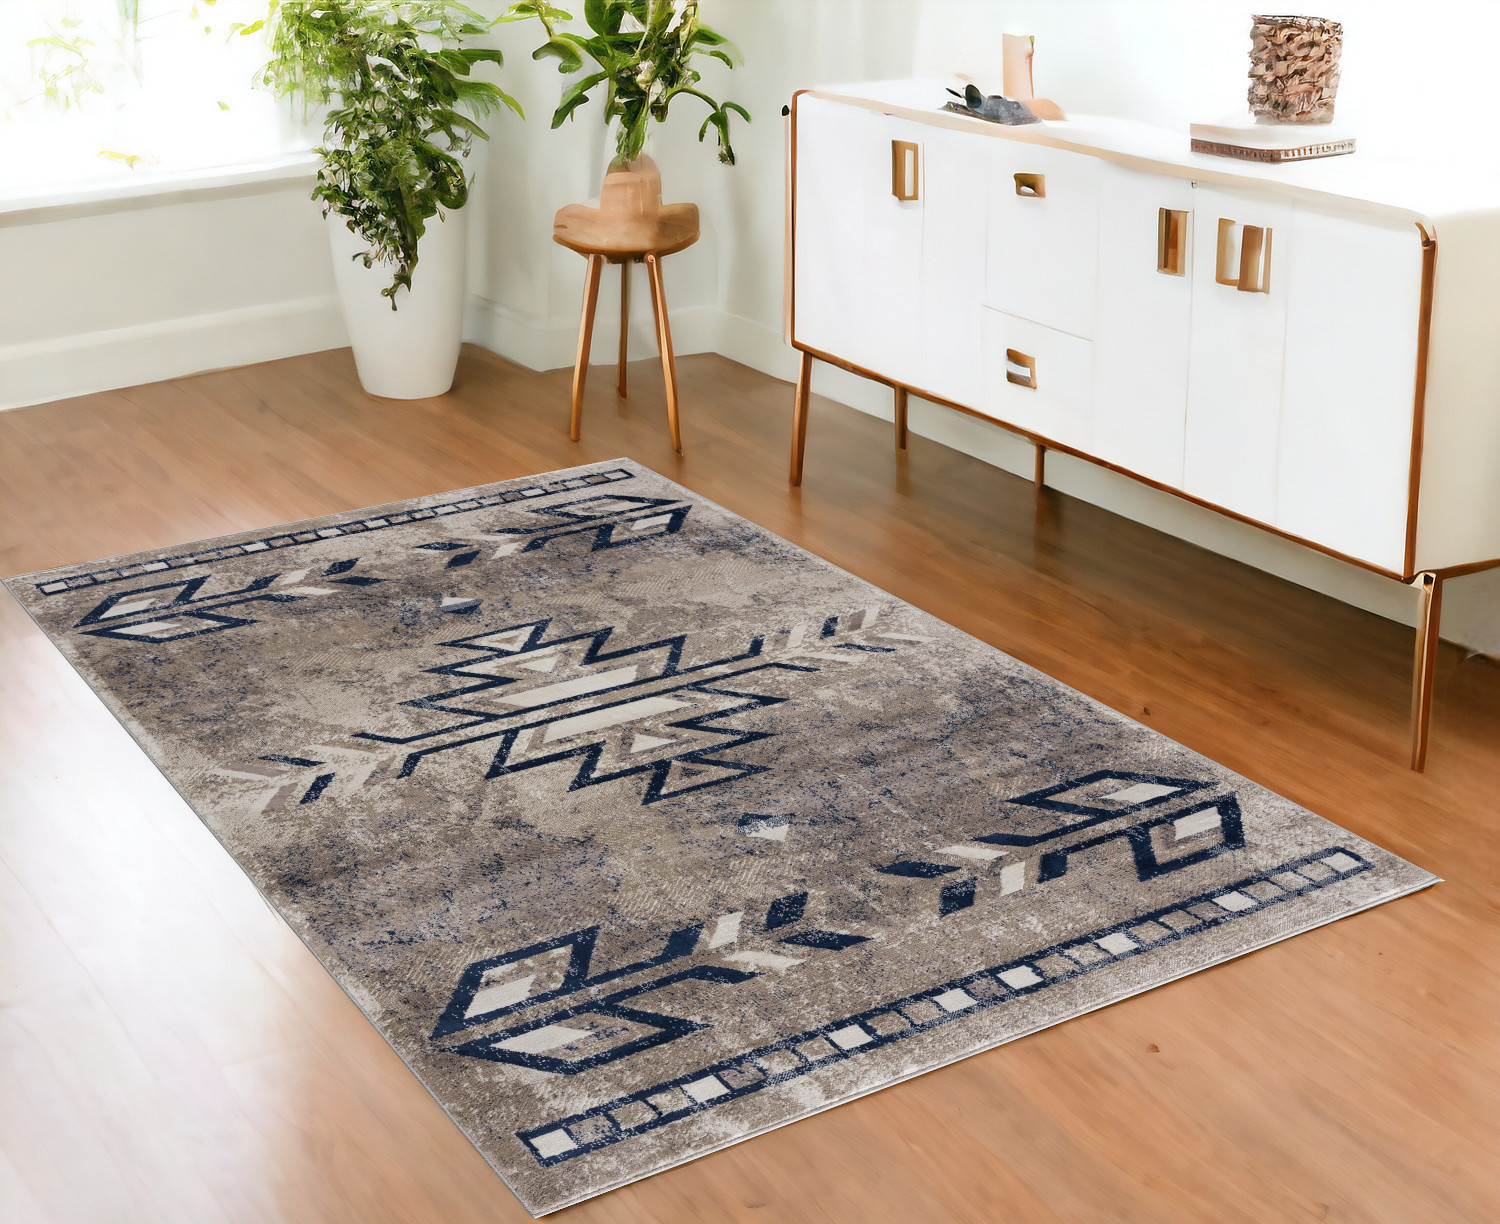 4’ X 6’ Beige And Blue Boho Chic Area Rug-390163-1